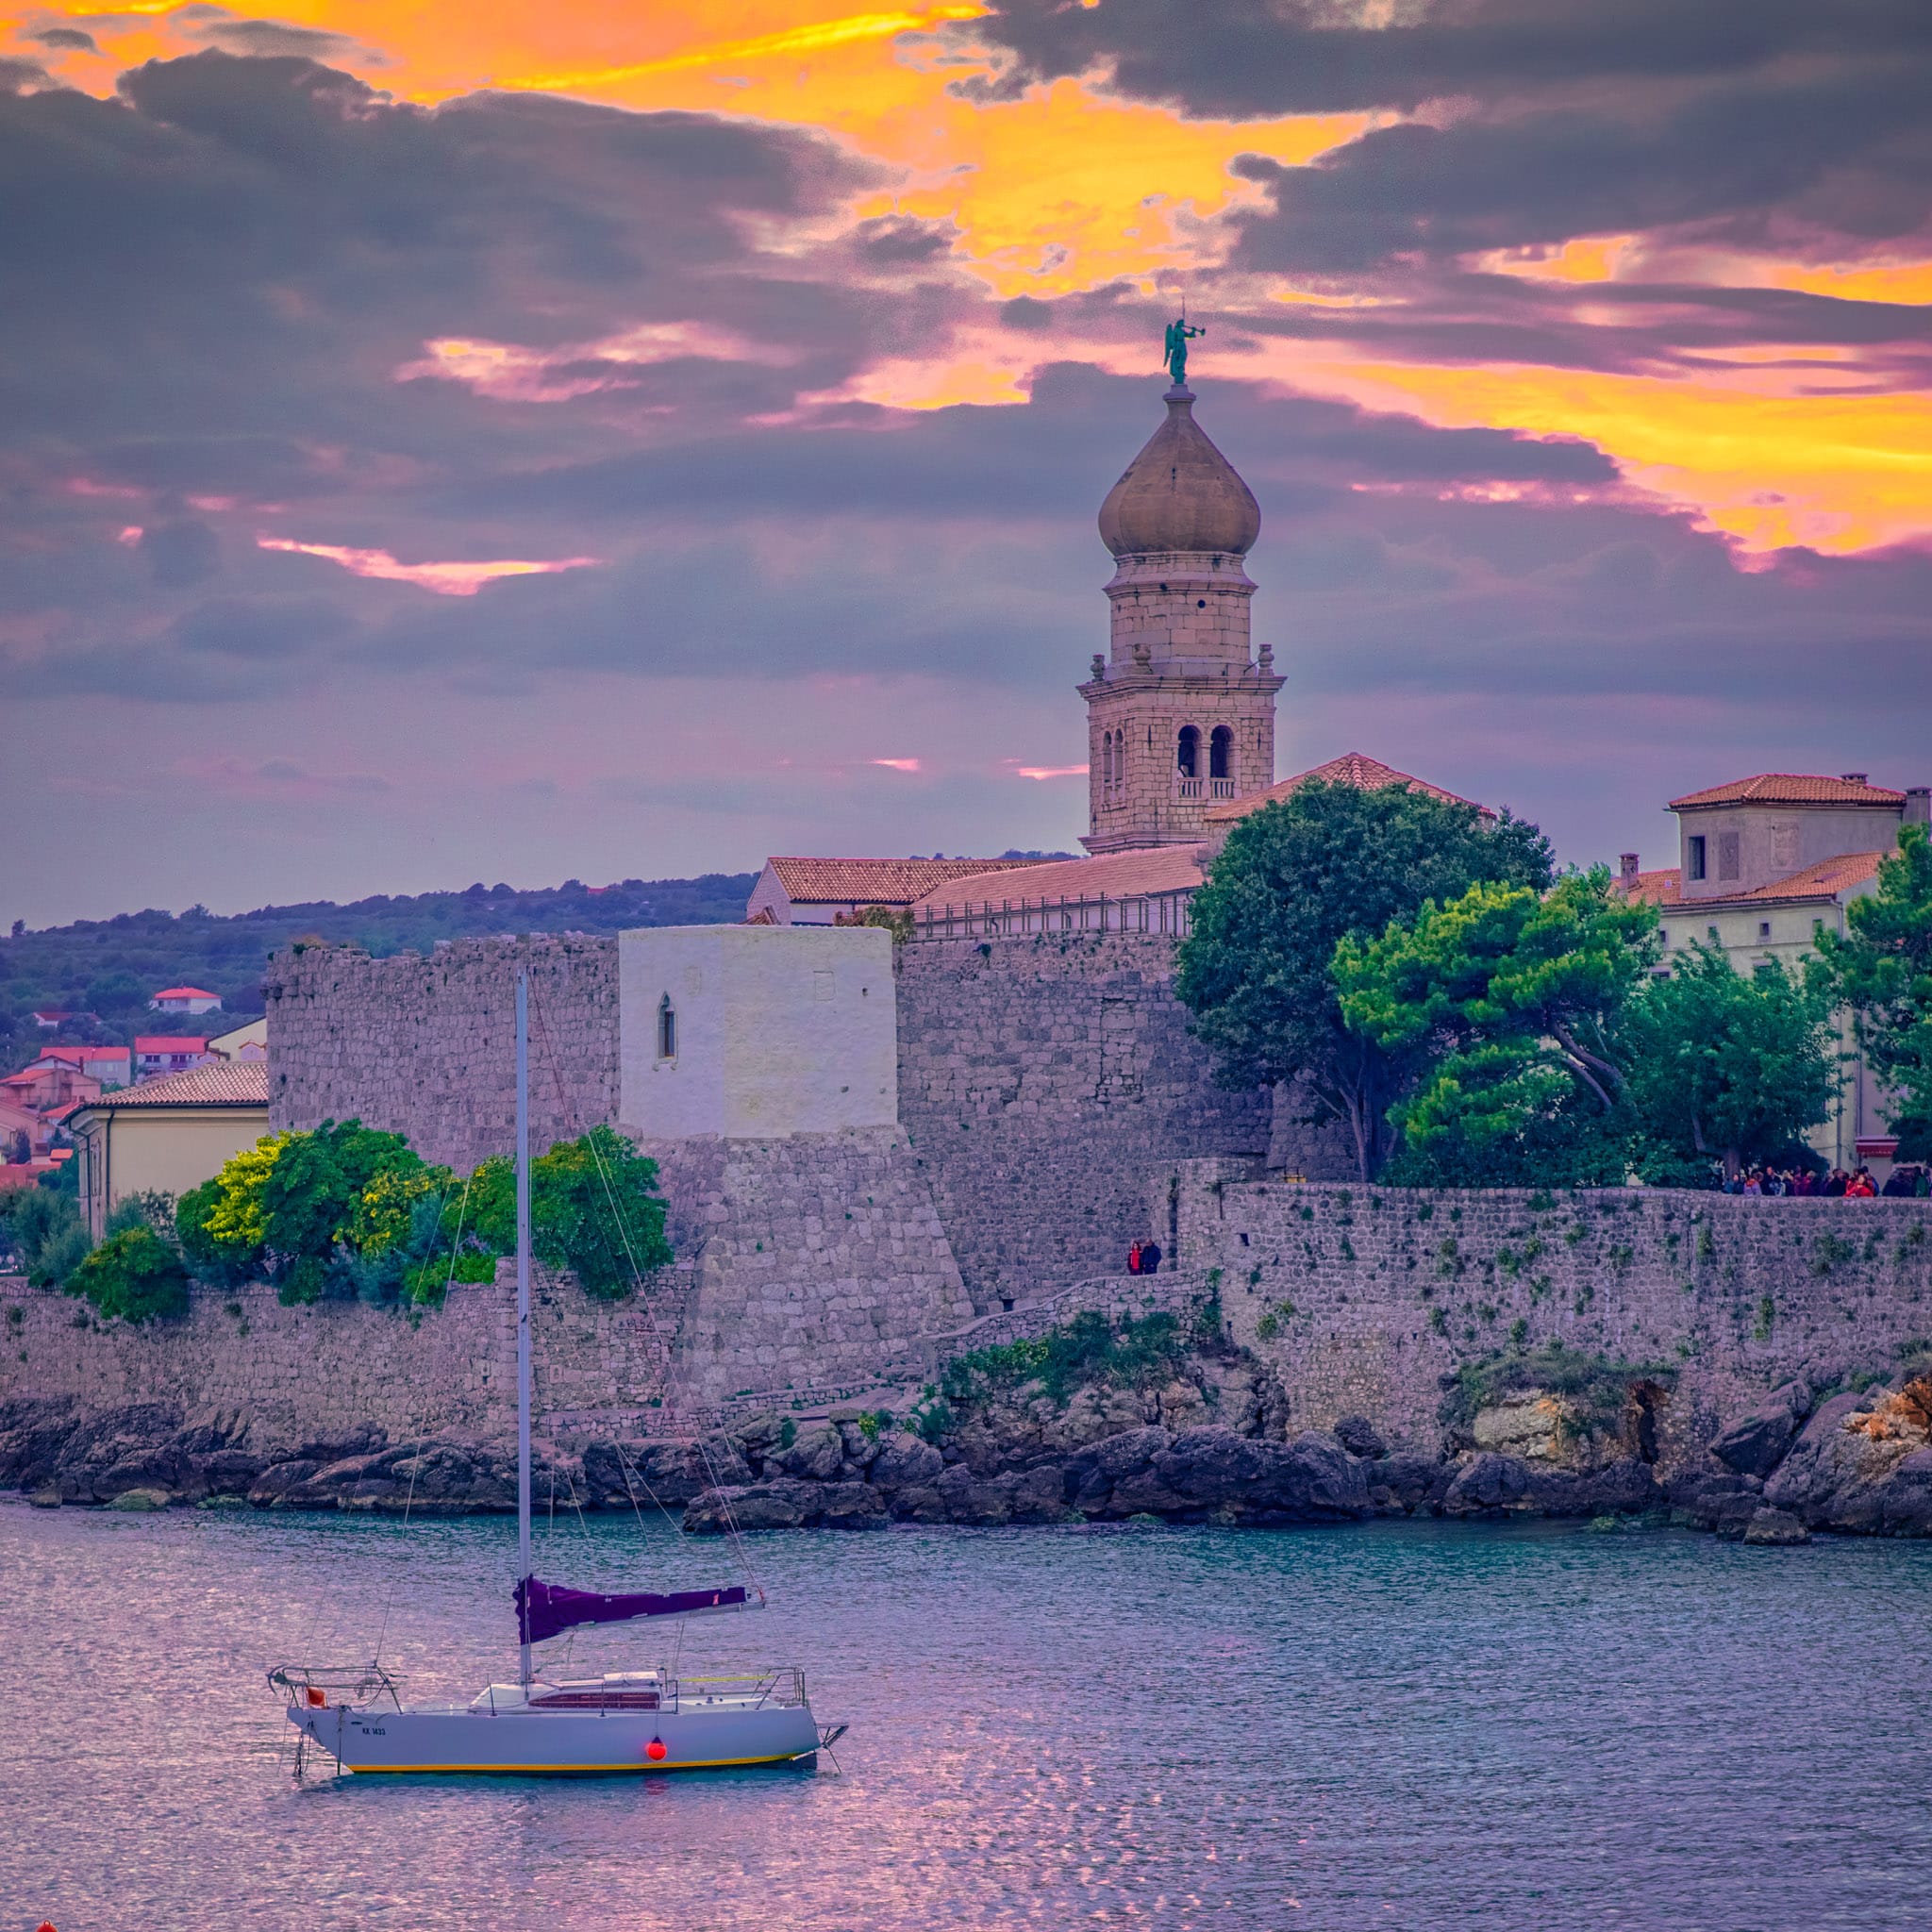 A sail boat sits at anchor near the medieval walls of Krk, Croatia, with Krk Cathedral in the distance.